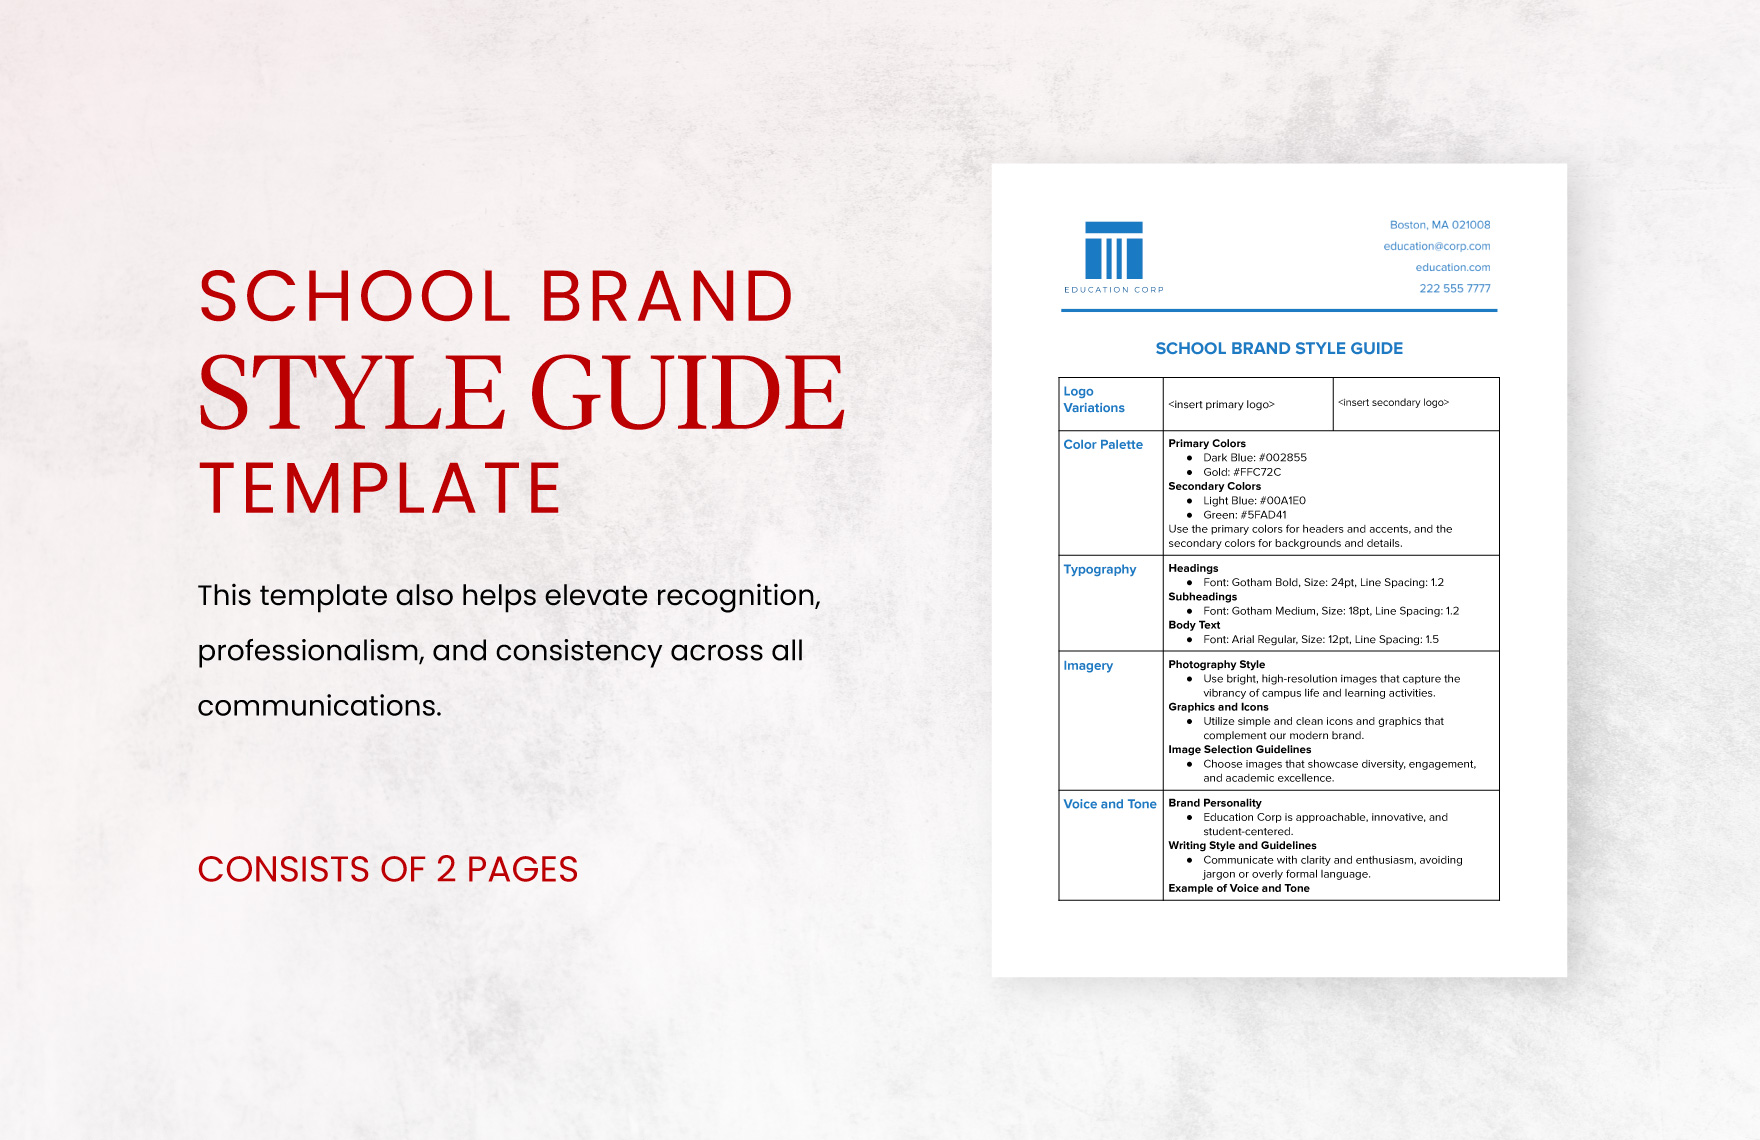 School Brand Style Guide Template in Word, Google Docs, PDF